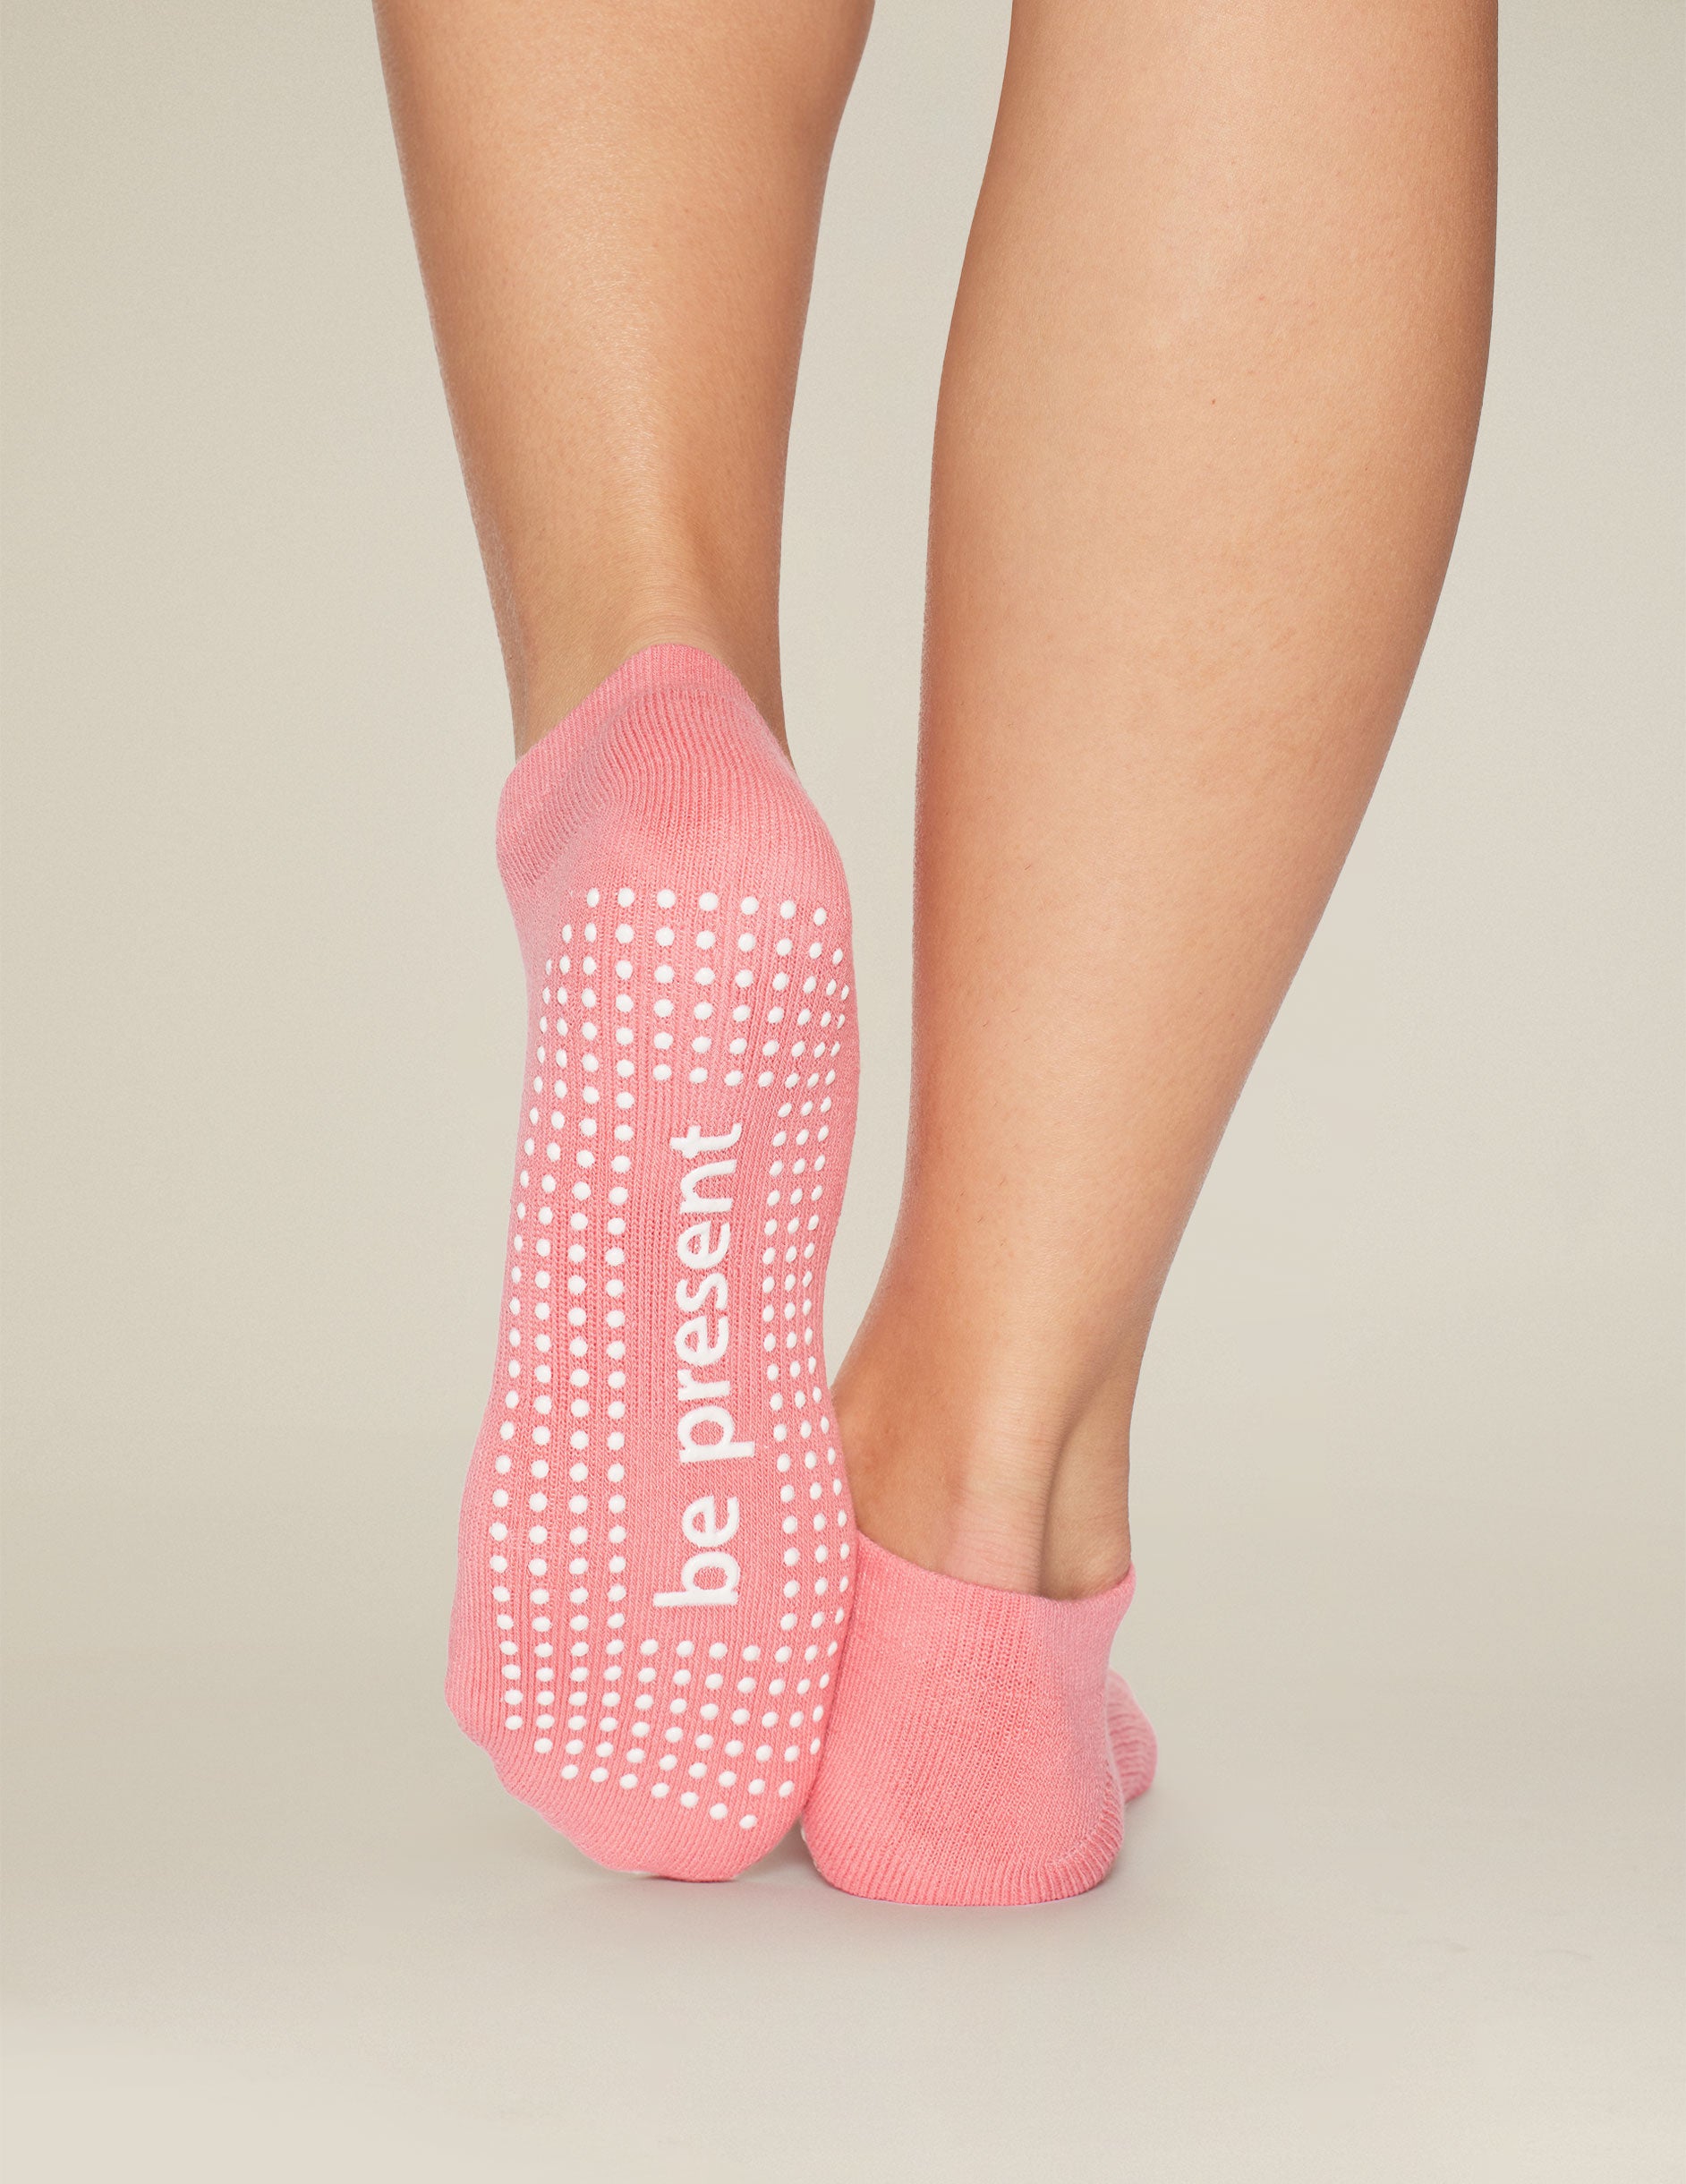 pink ankle grip socks with the mantra "be present" printed. 